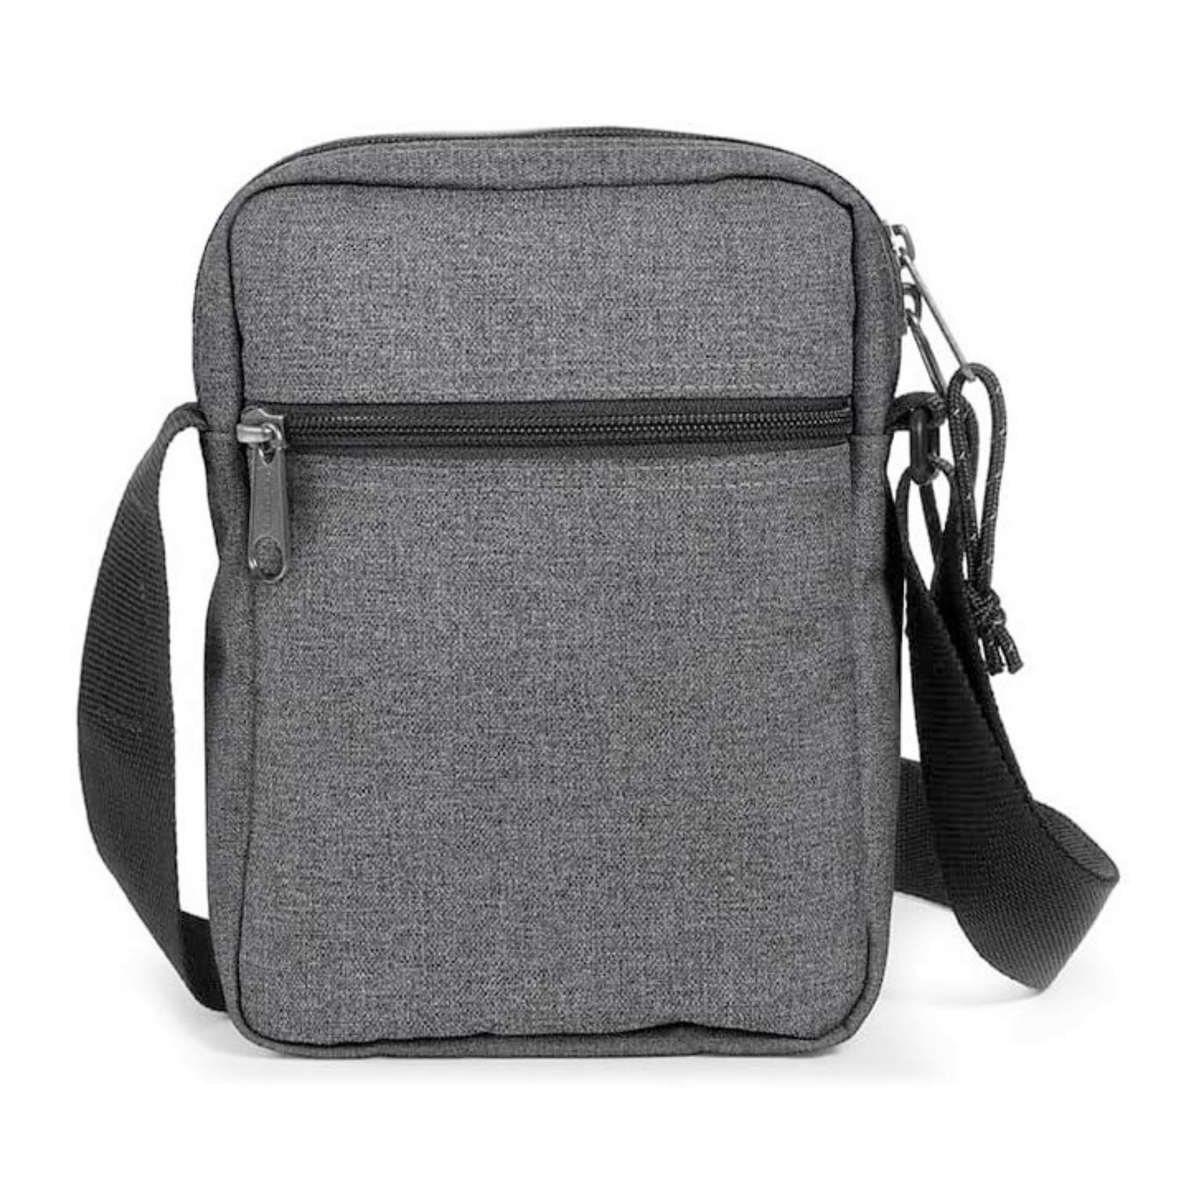 Cross Body Bag in Grey Fabric - Durable, Light - Weight, Functional ...